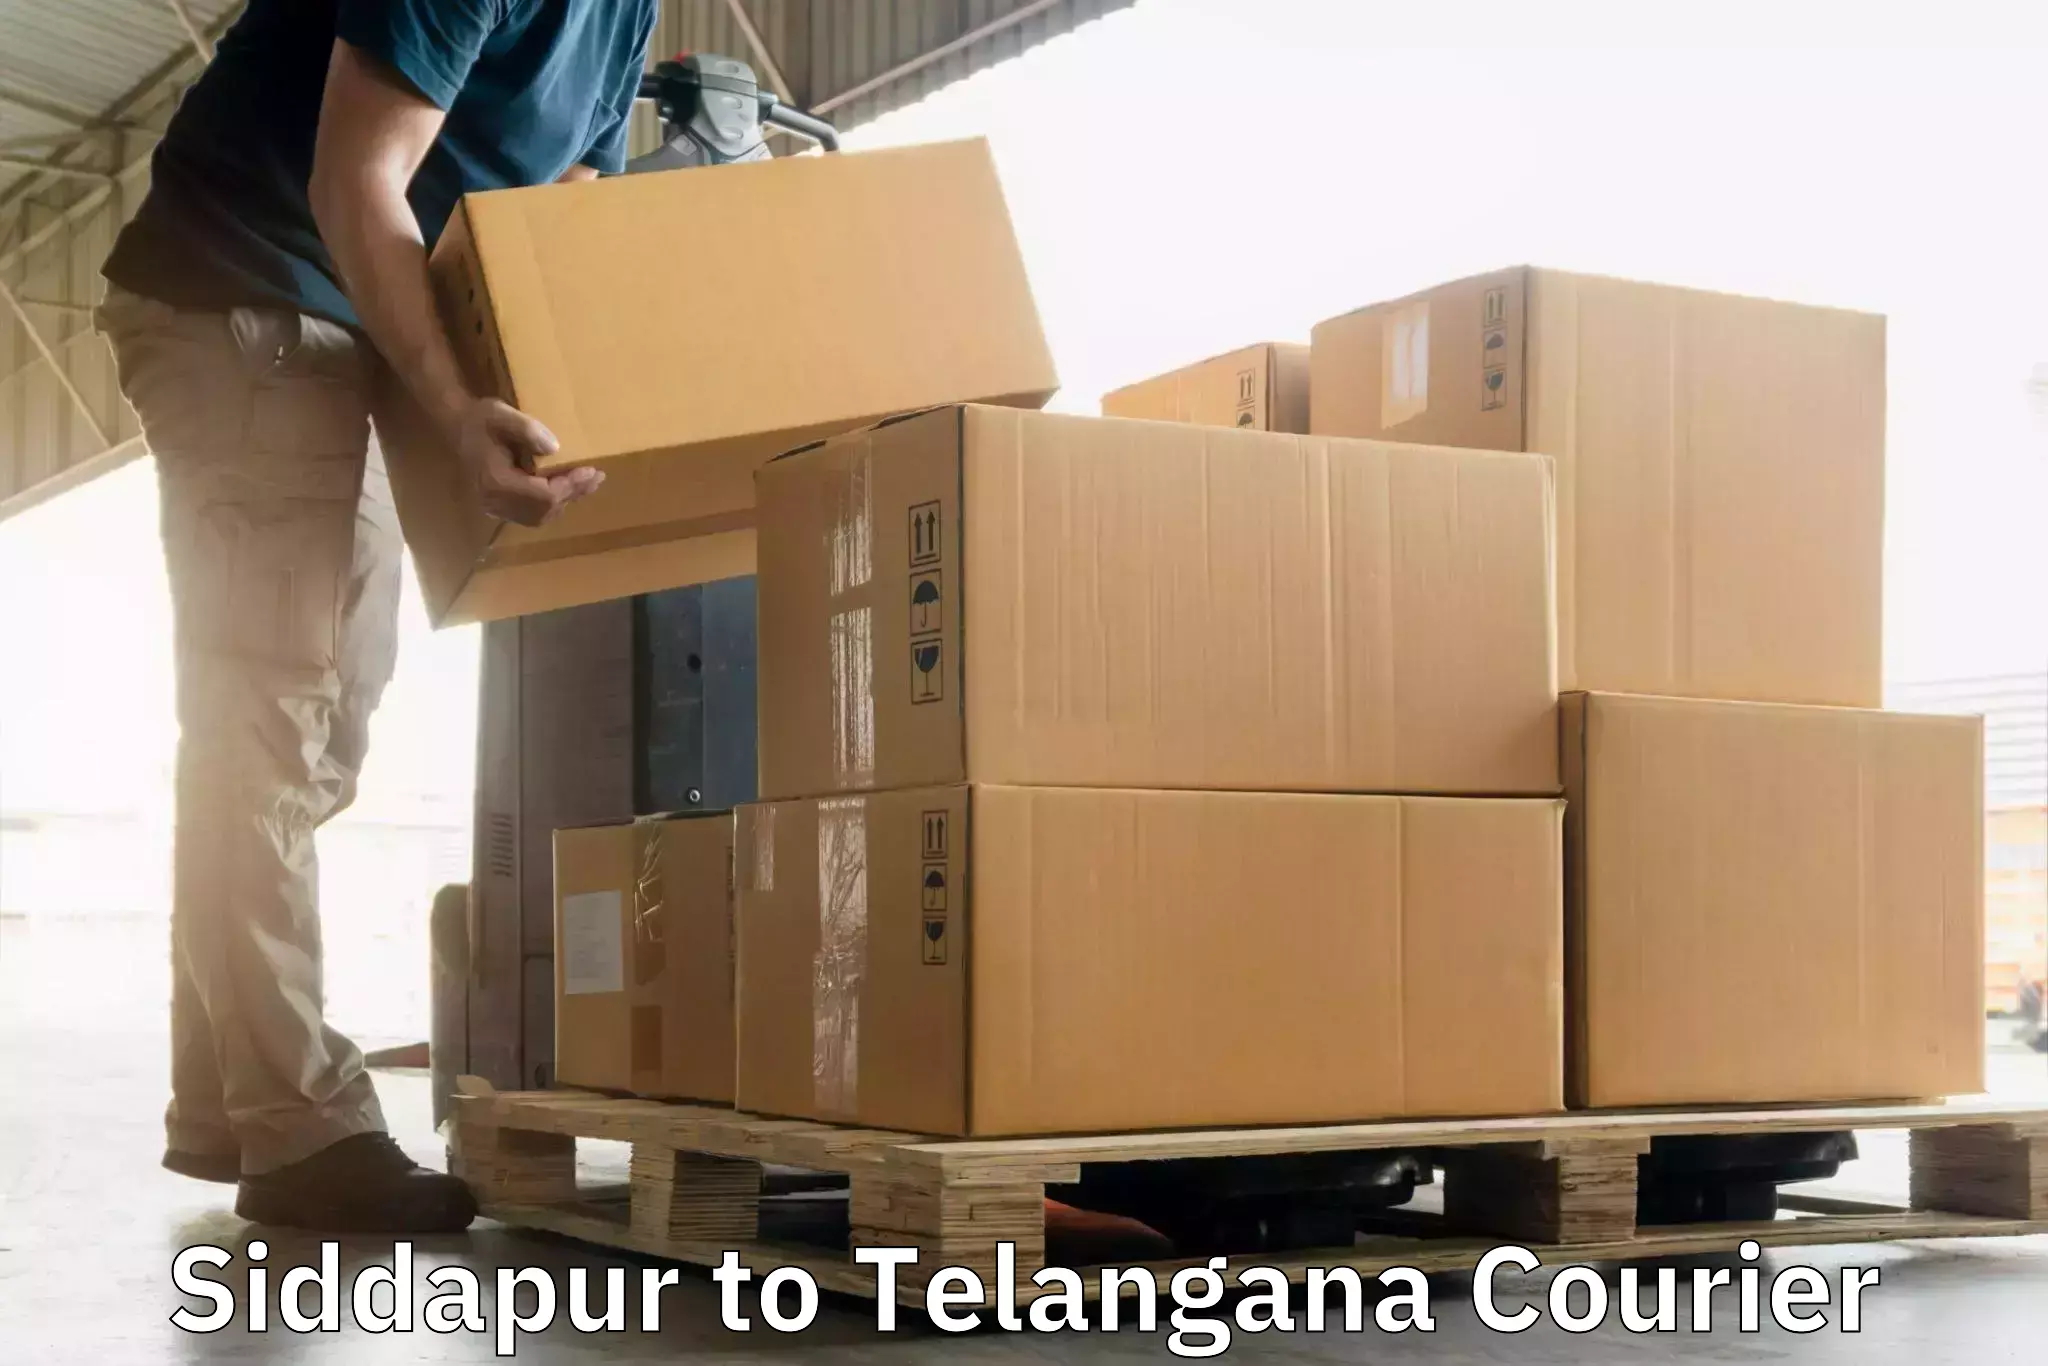 Punctual parcel services in Siddapur to Bejjanki